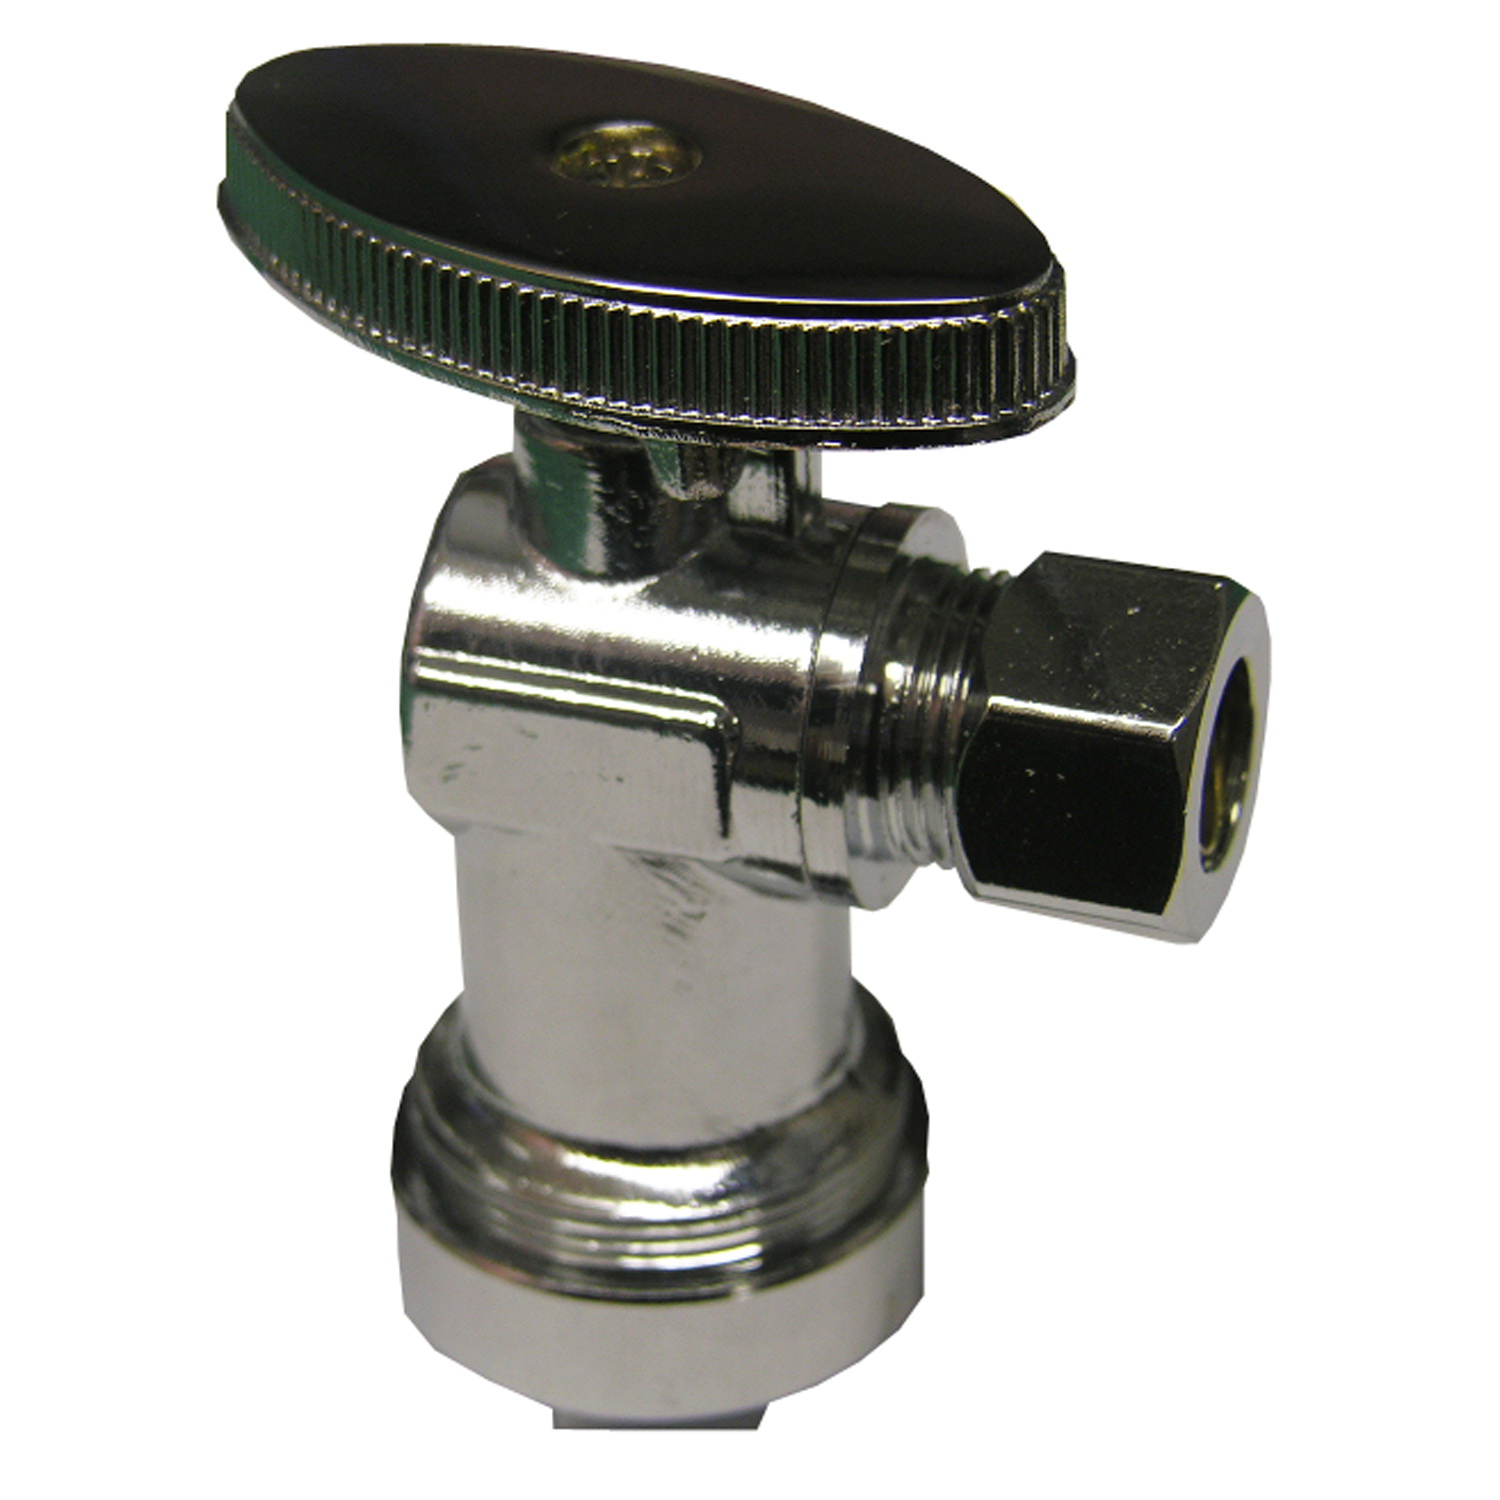 Lasco 06-9293 Angle Stop Valve, 5/8 x 3/8 in Connection, Push-In x Compression, Brass Body